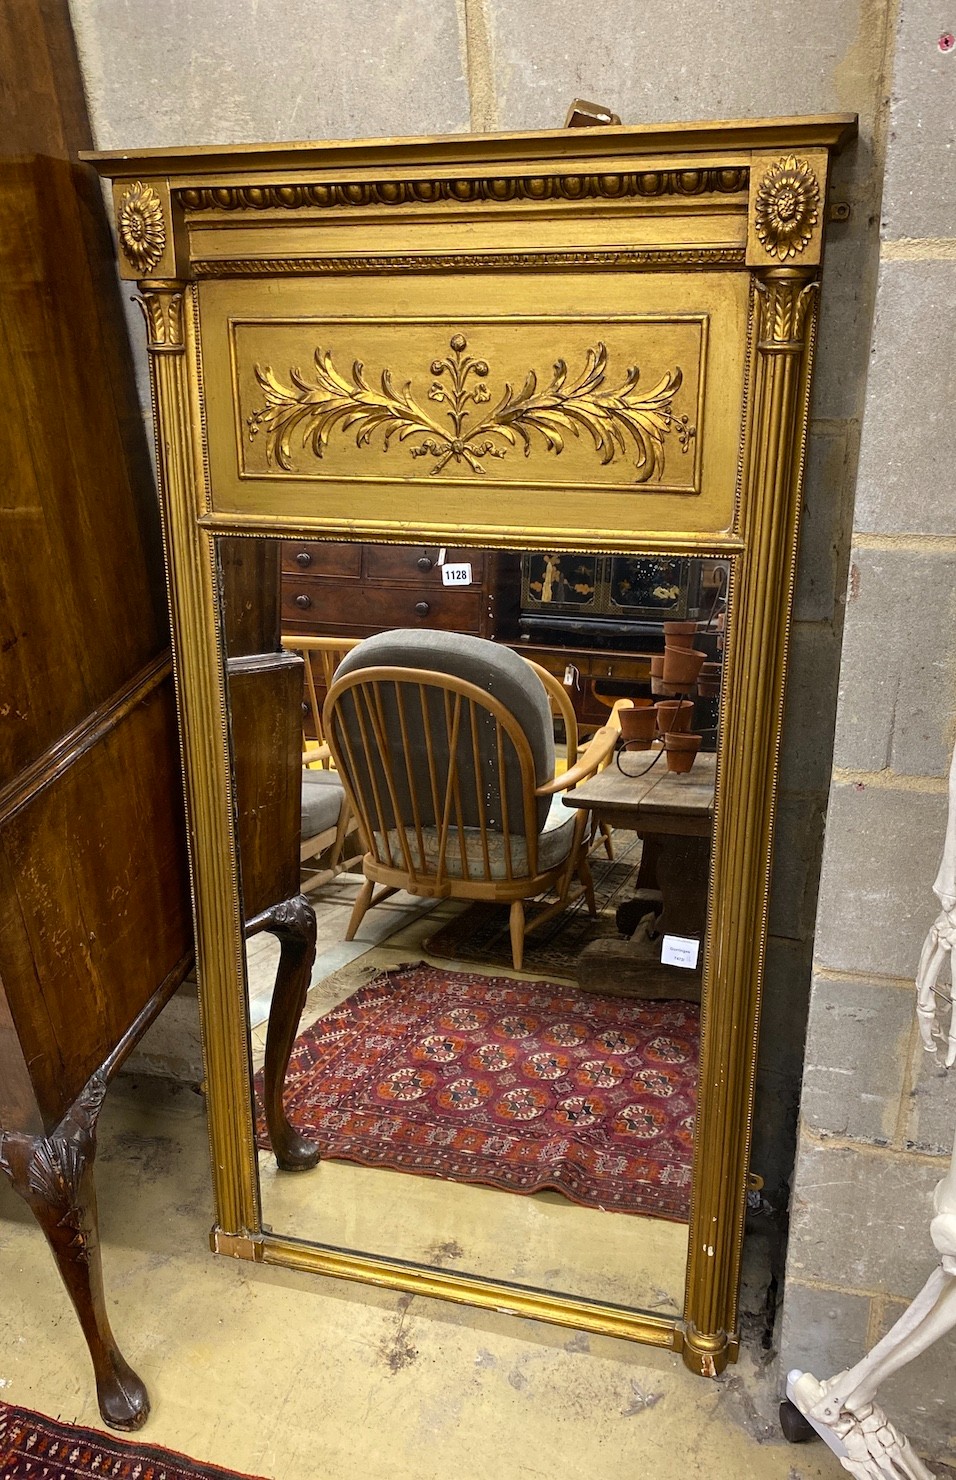 A 19th century giltwood and composition pier glass, width 79cm, height 145cm